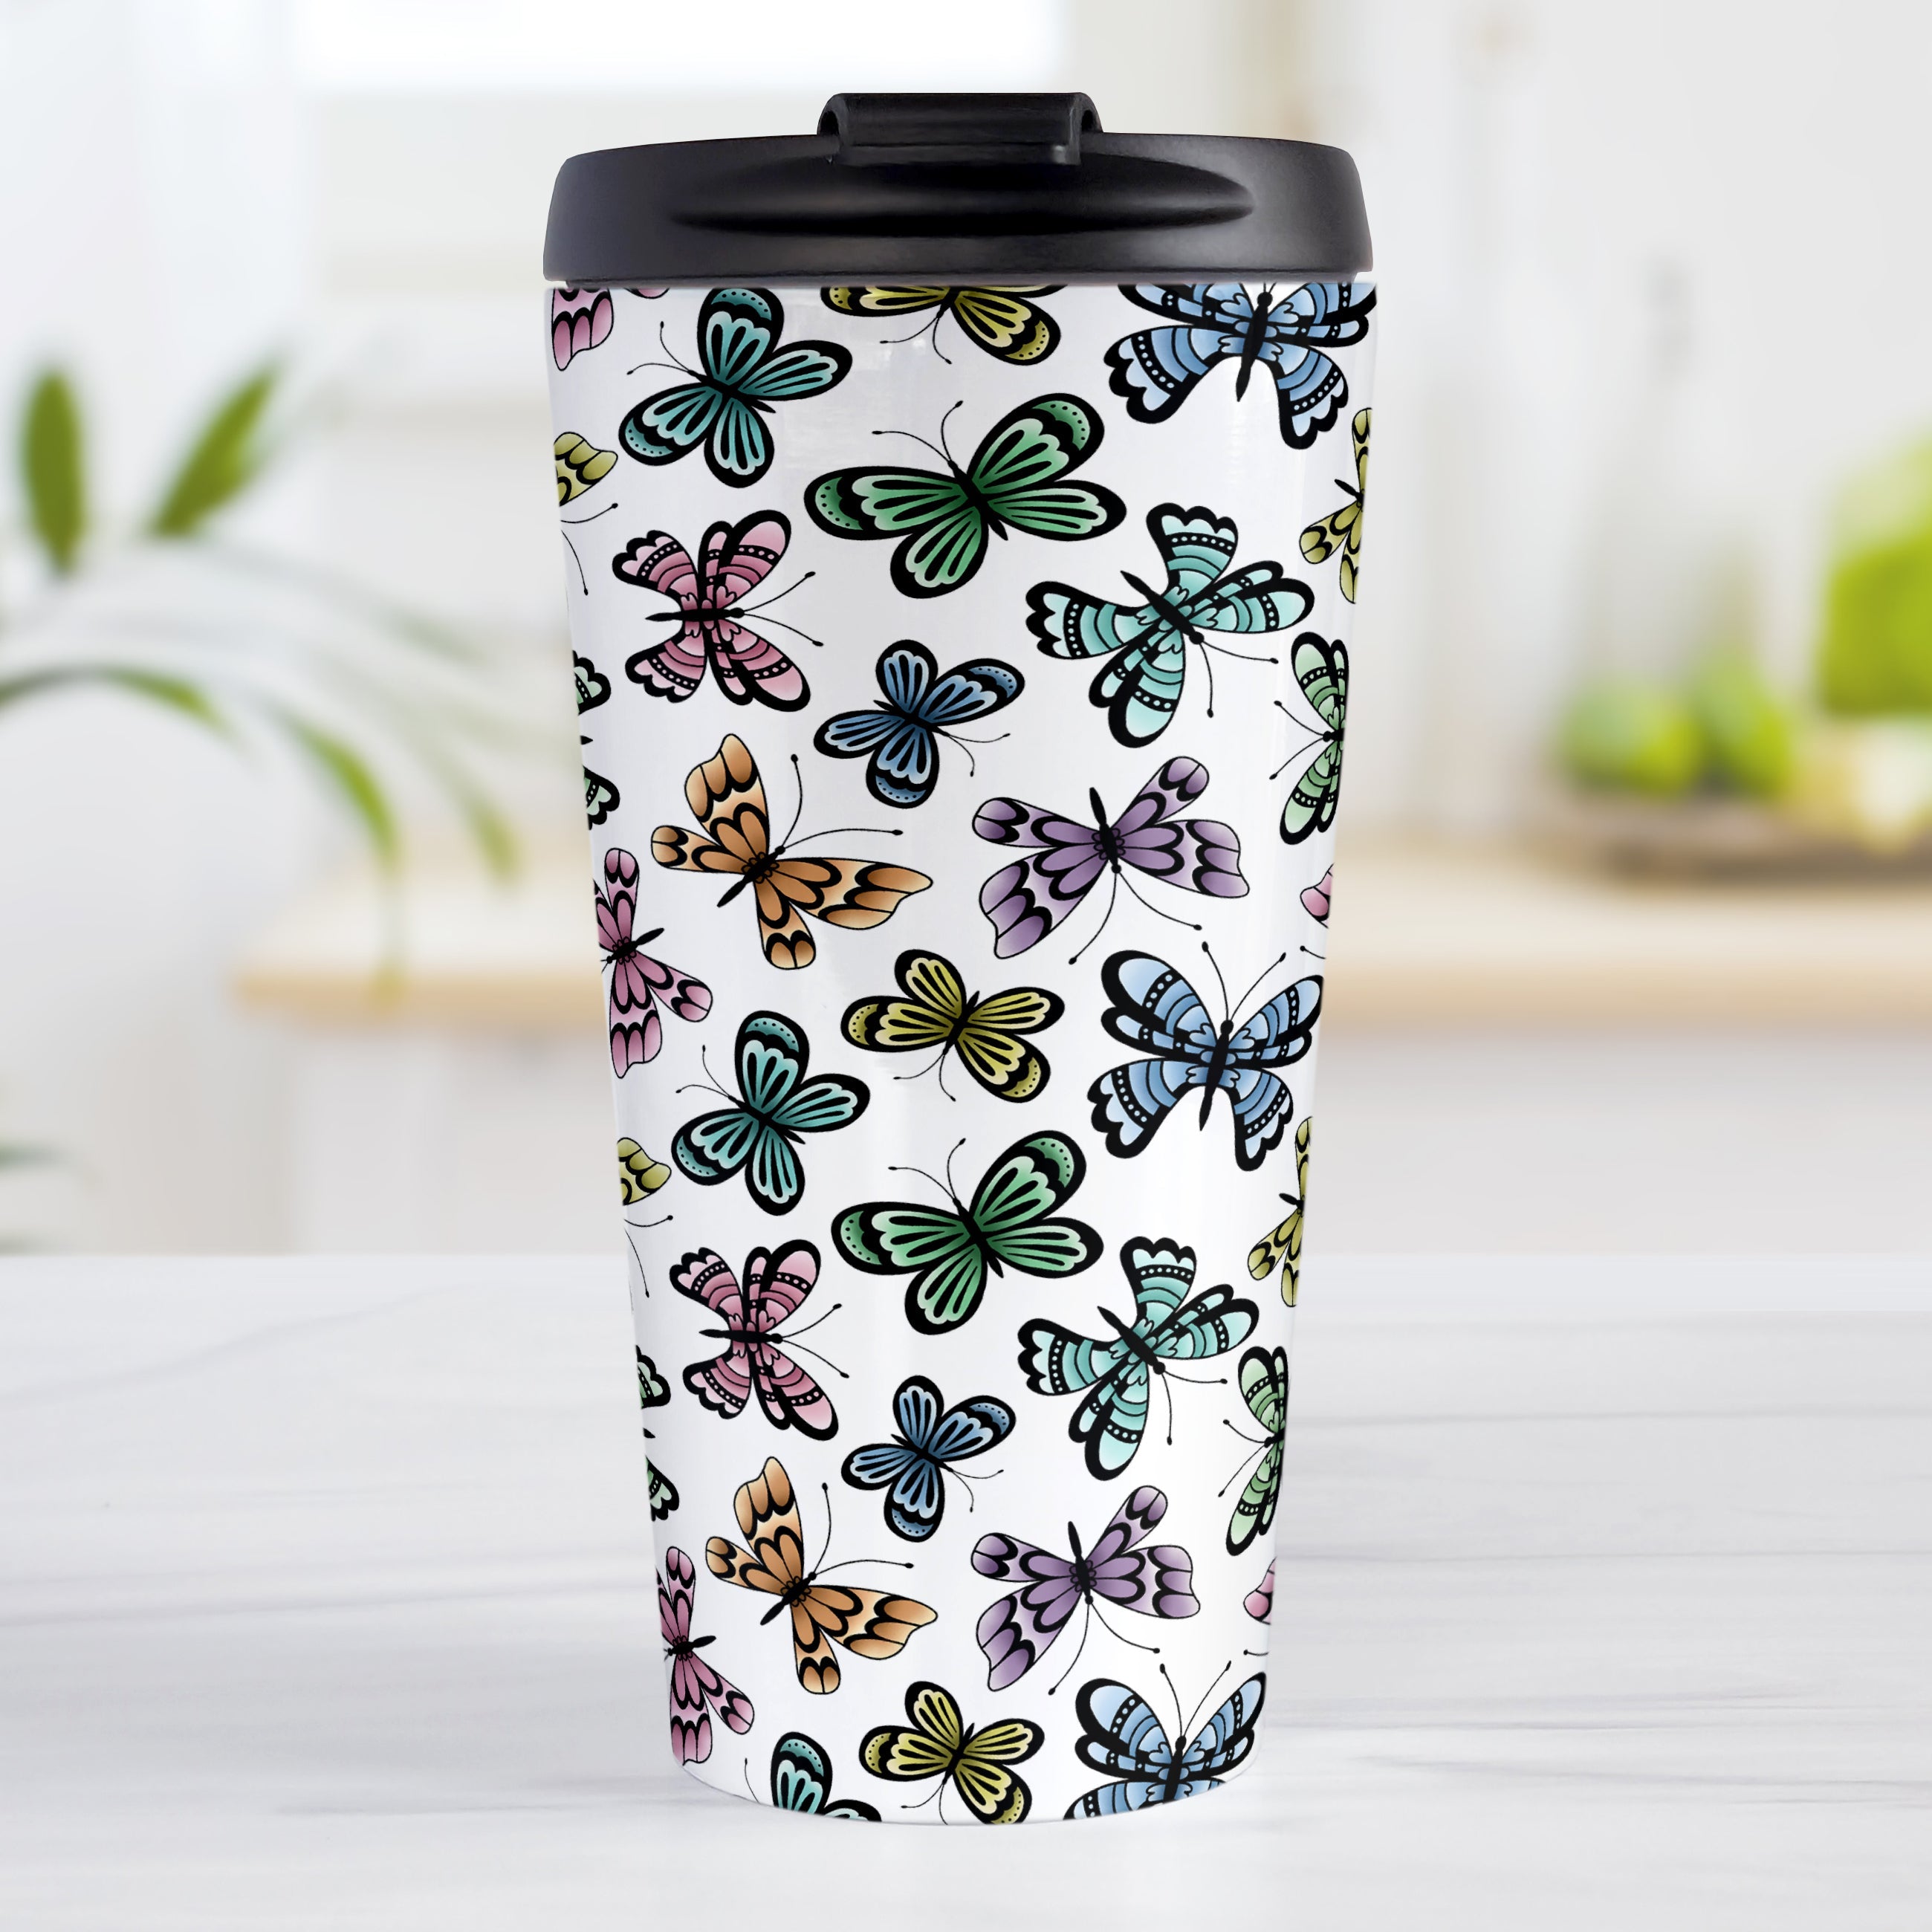 Rainbow Butterfly Insulated Travel Mug, made in U.S.A. – ArtistGifts